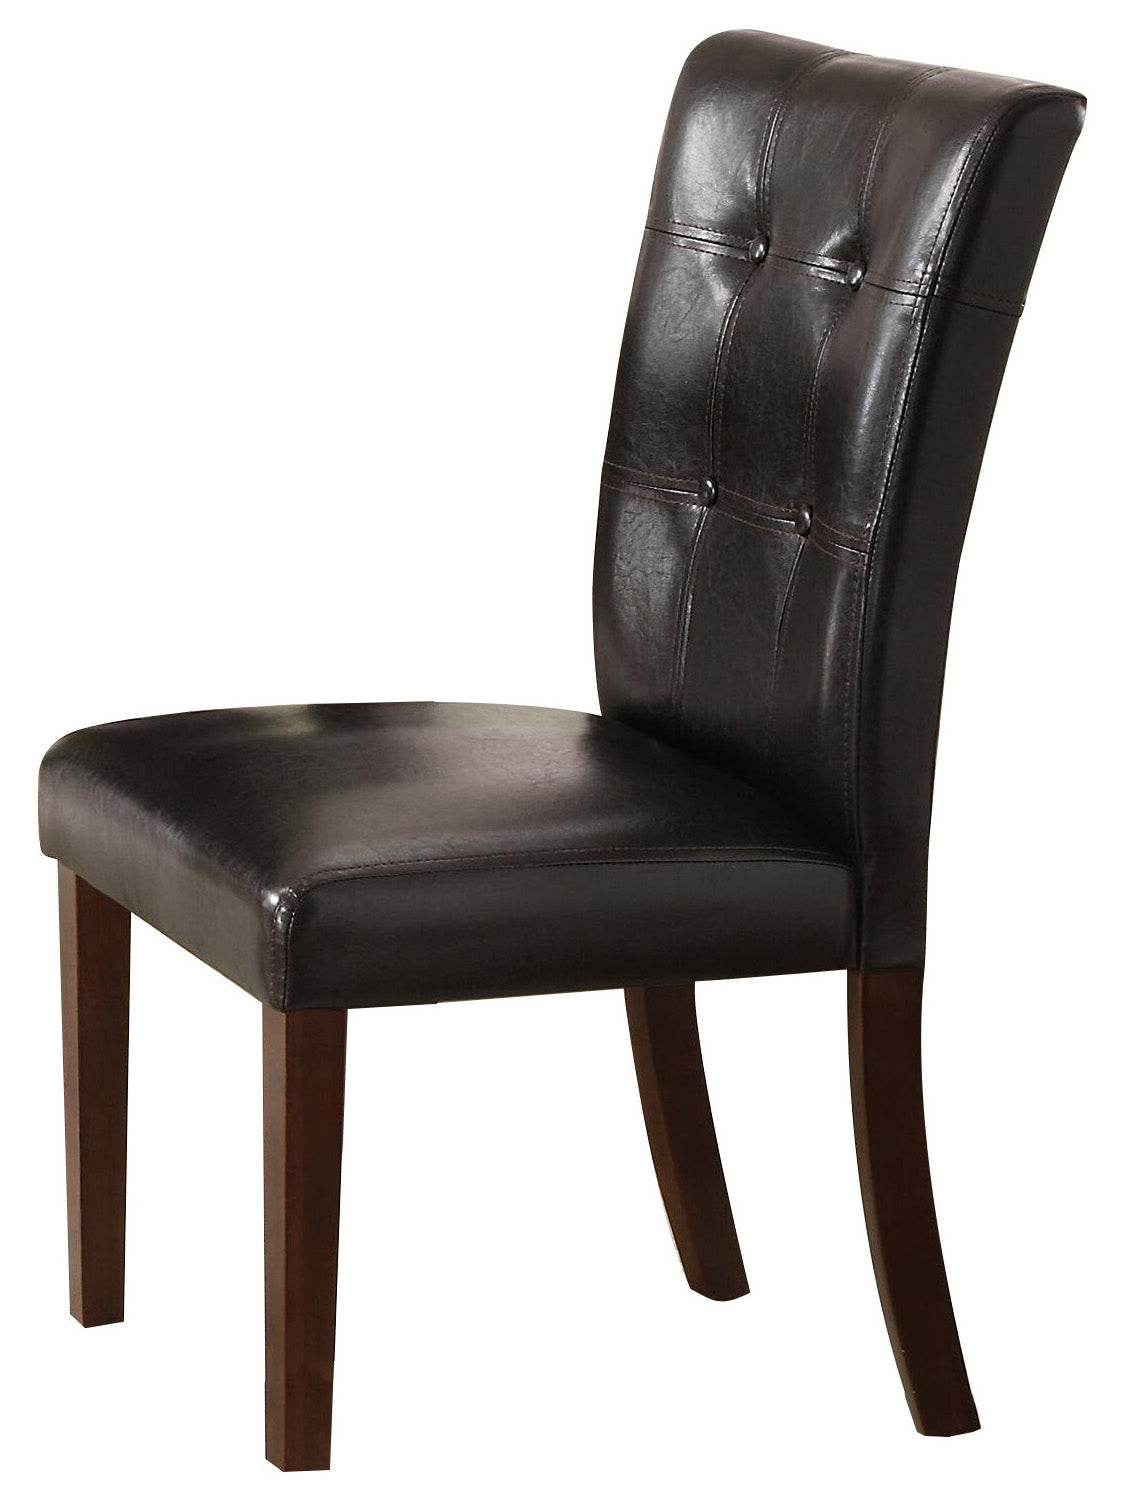 Homelegance Decatur 2 Dining Chair in Espresso Leatherette